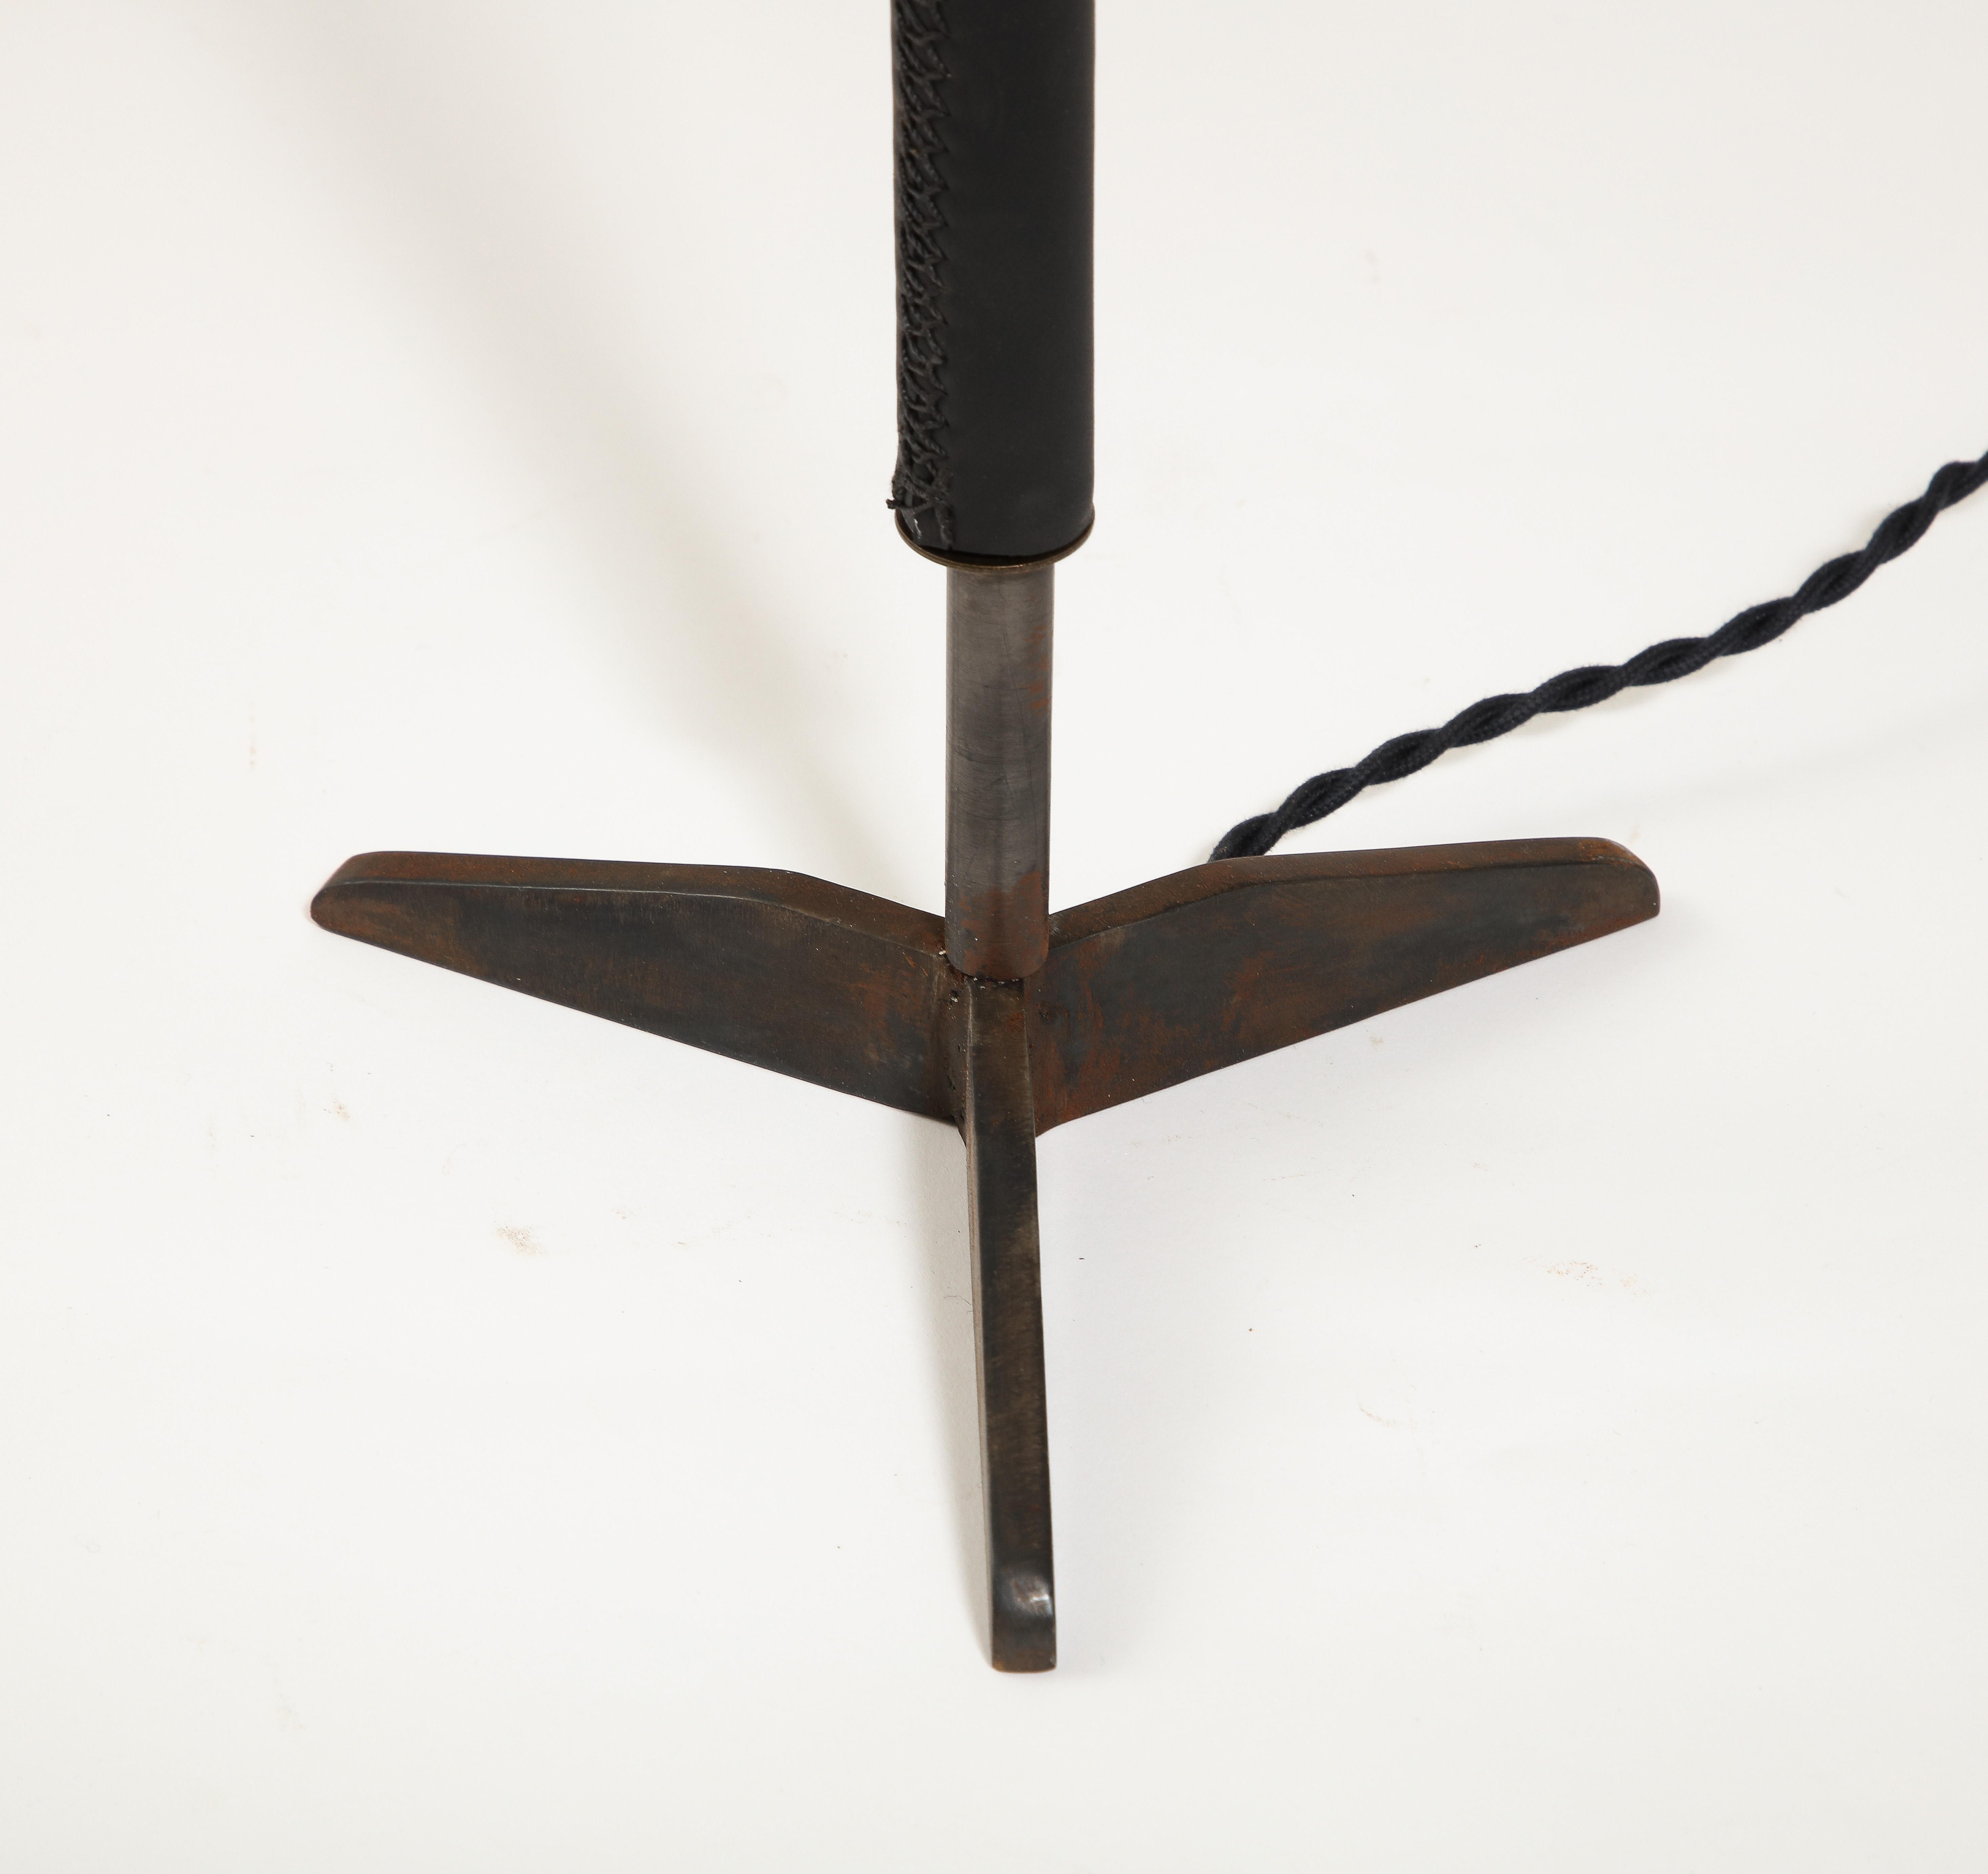 Tripod in blackened steel lamps with a leather stem. Base size only: 22x9.
